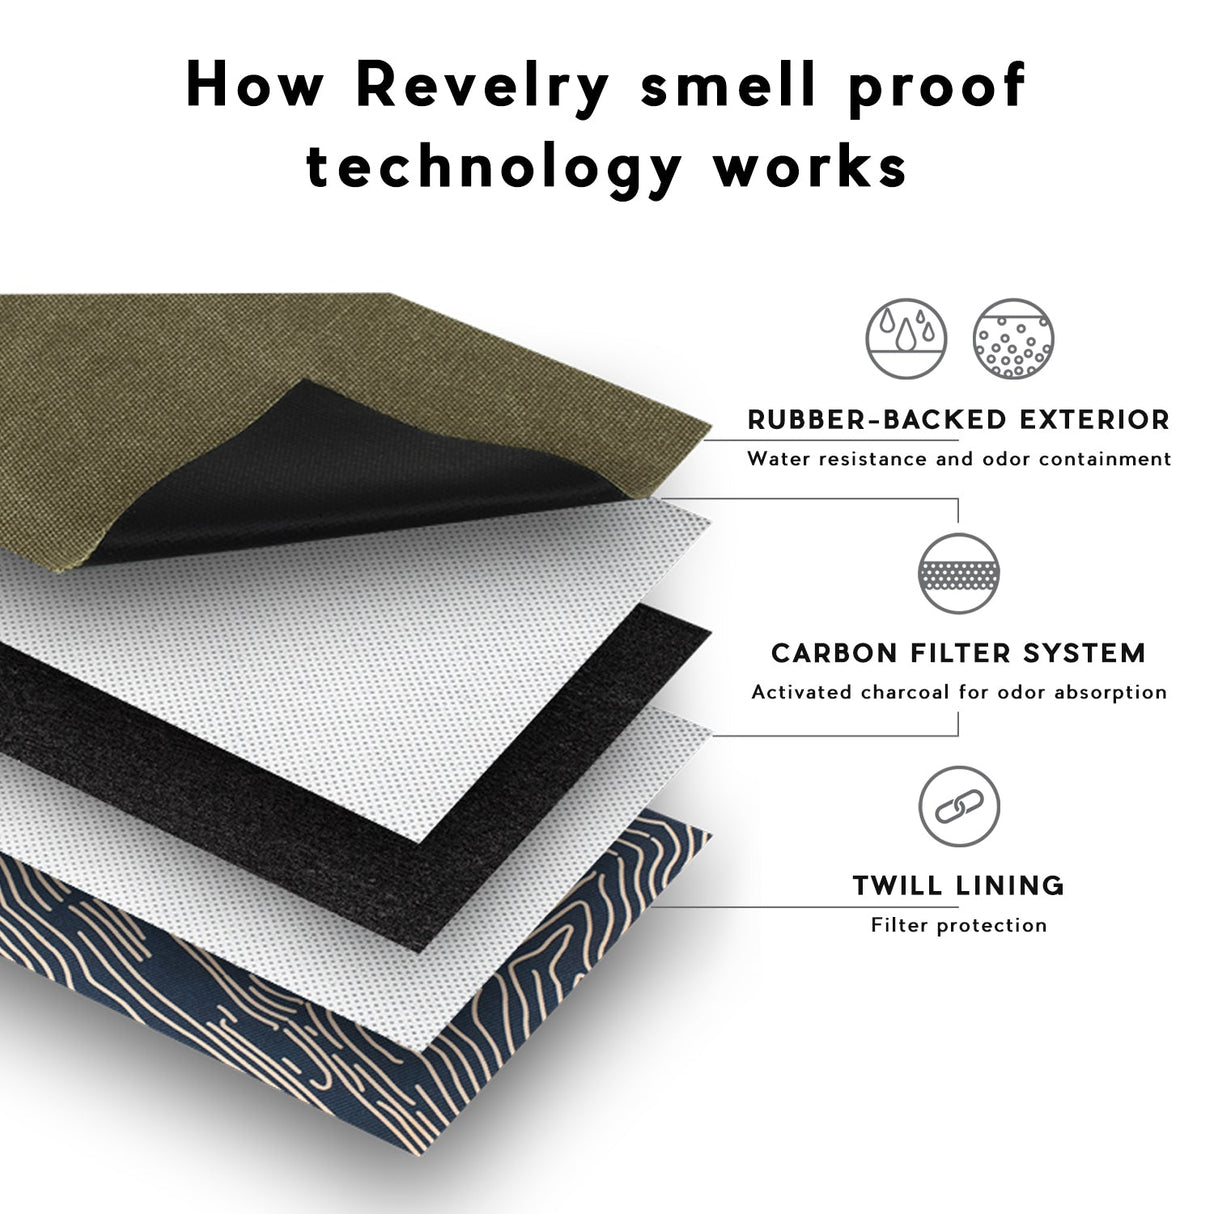 Revelry Supply Rolling Kit materials showcasing smell proof technology with carbon filter system